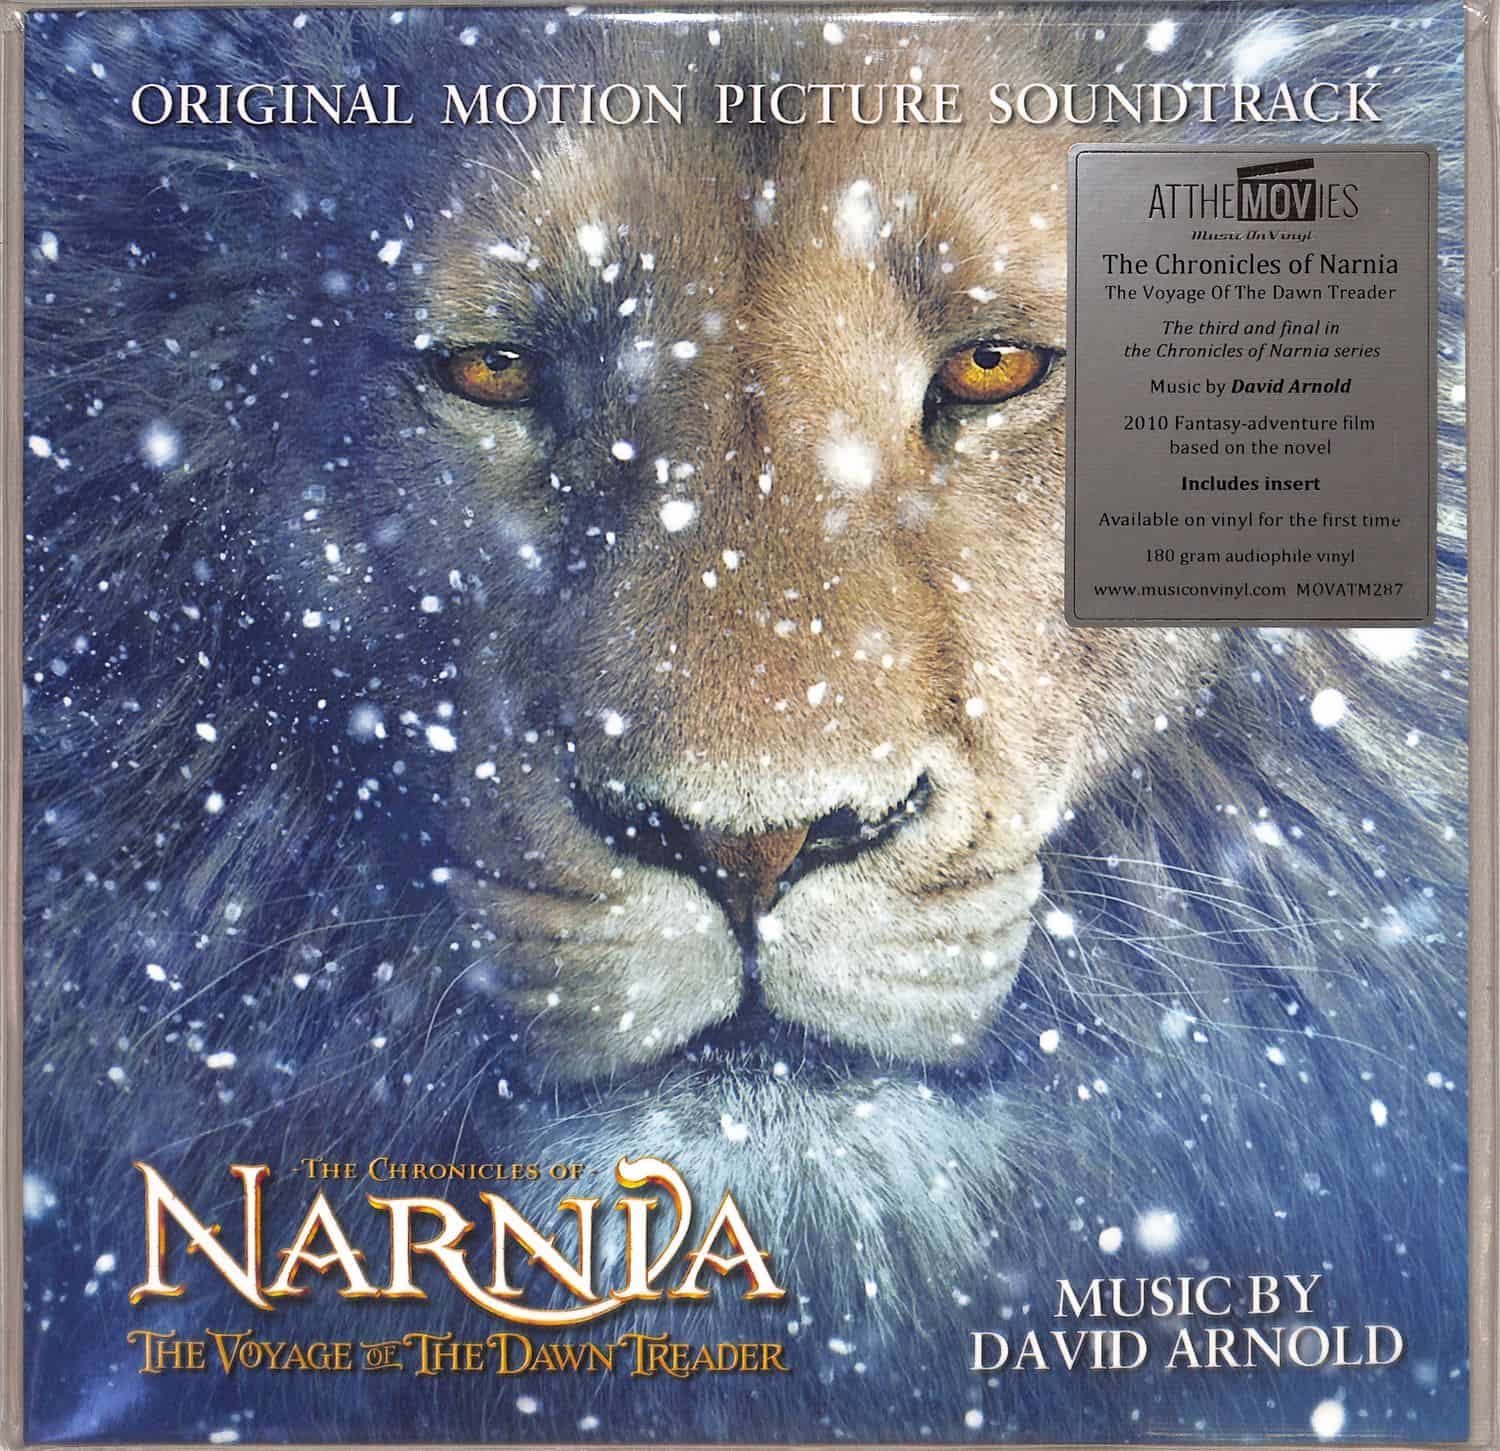 David Arnold - CHRONICLES OF NARNIA - THE VOYAGE OF THE DAWN TREADER O.S.T. 